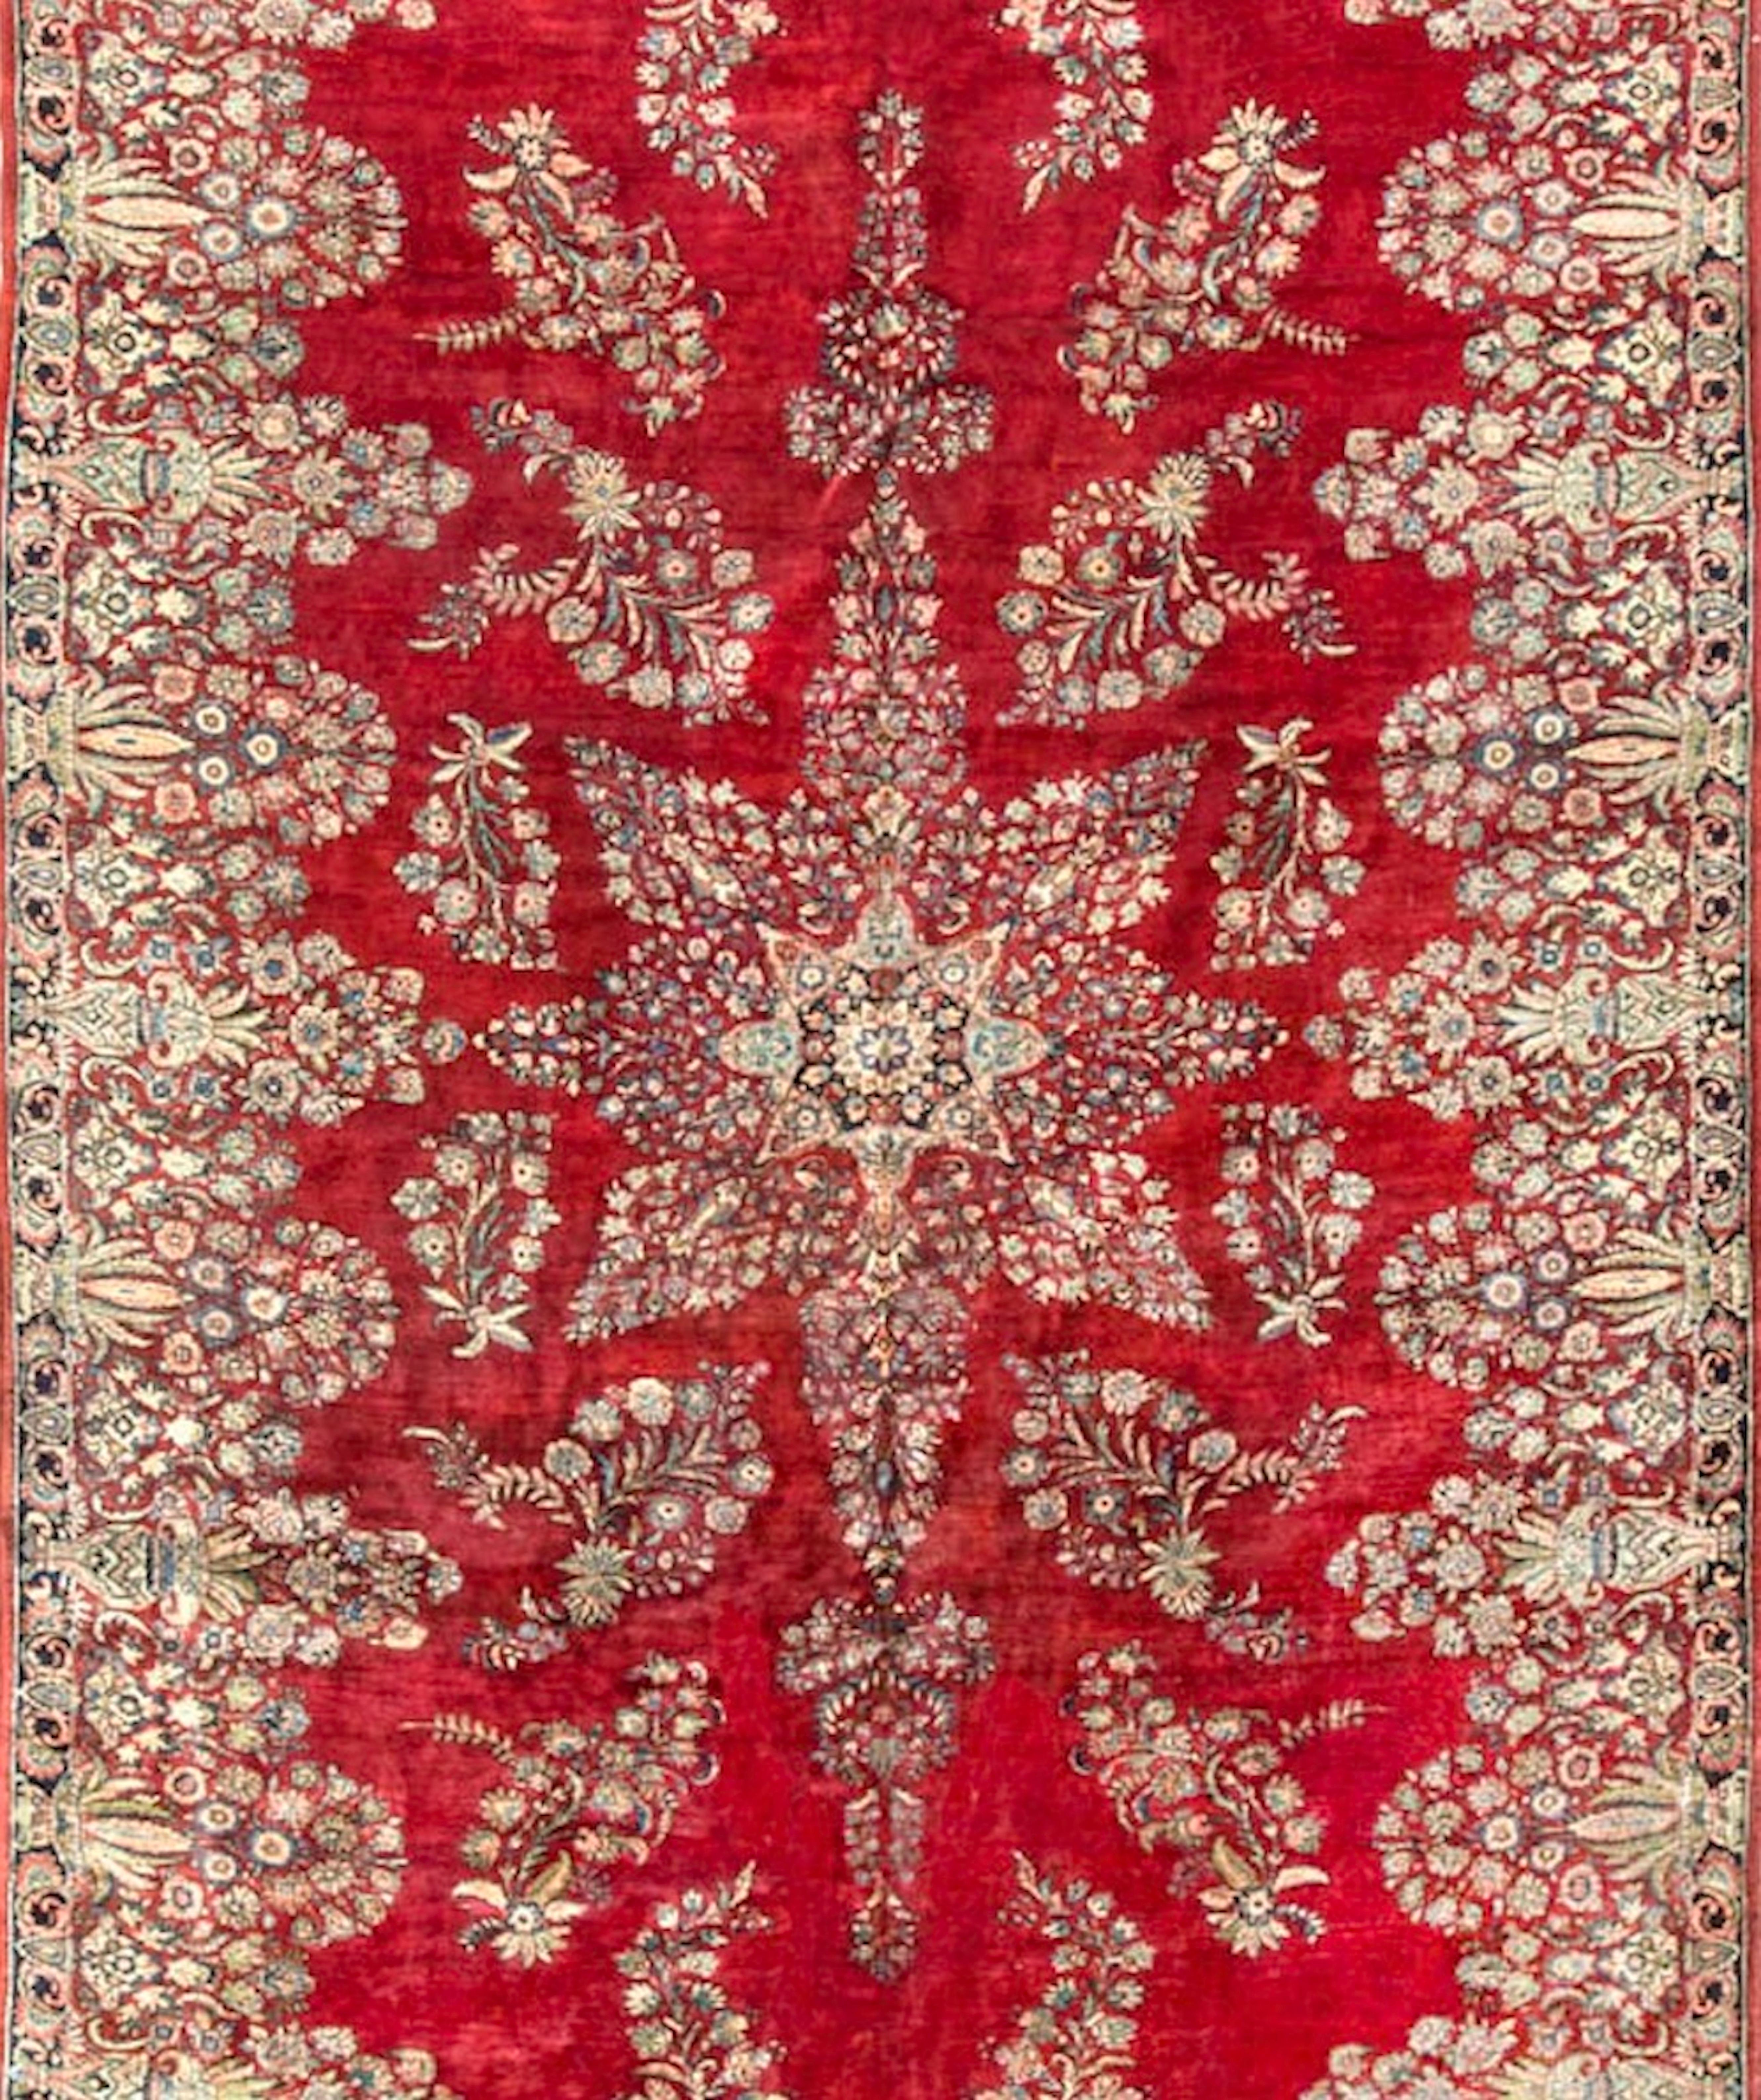 The dramatic style and colors of this rug will generate a unique ambiance in any room setting. The central star shaped medallion with the pattern repeated in the surrounding borders creates an overall harmony to the piece. Measures: 10'9